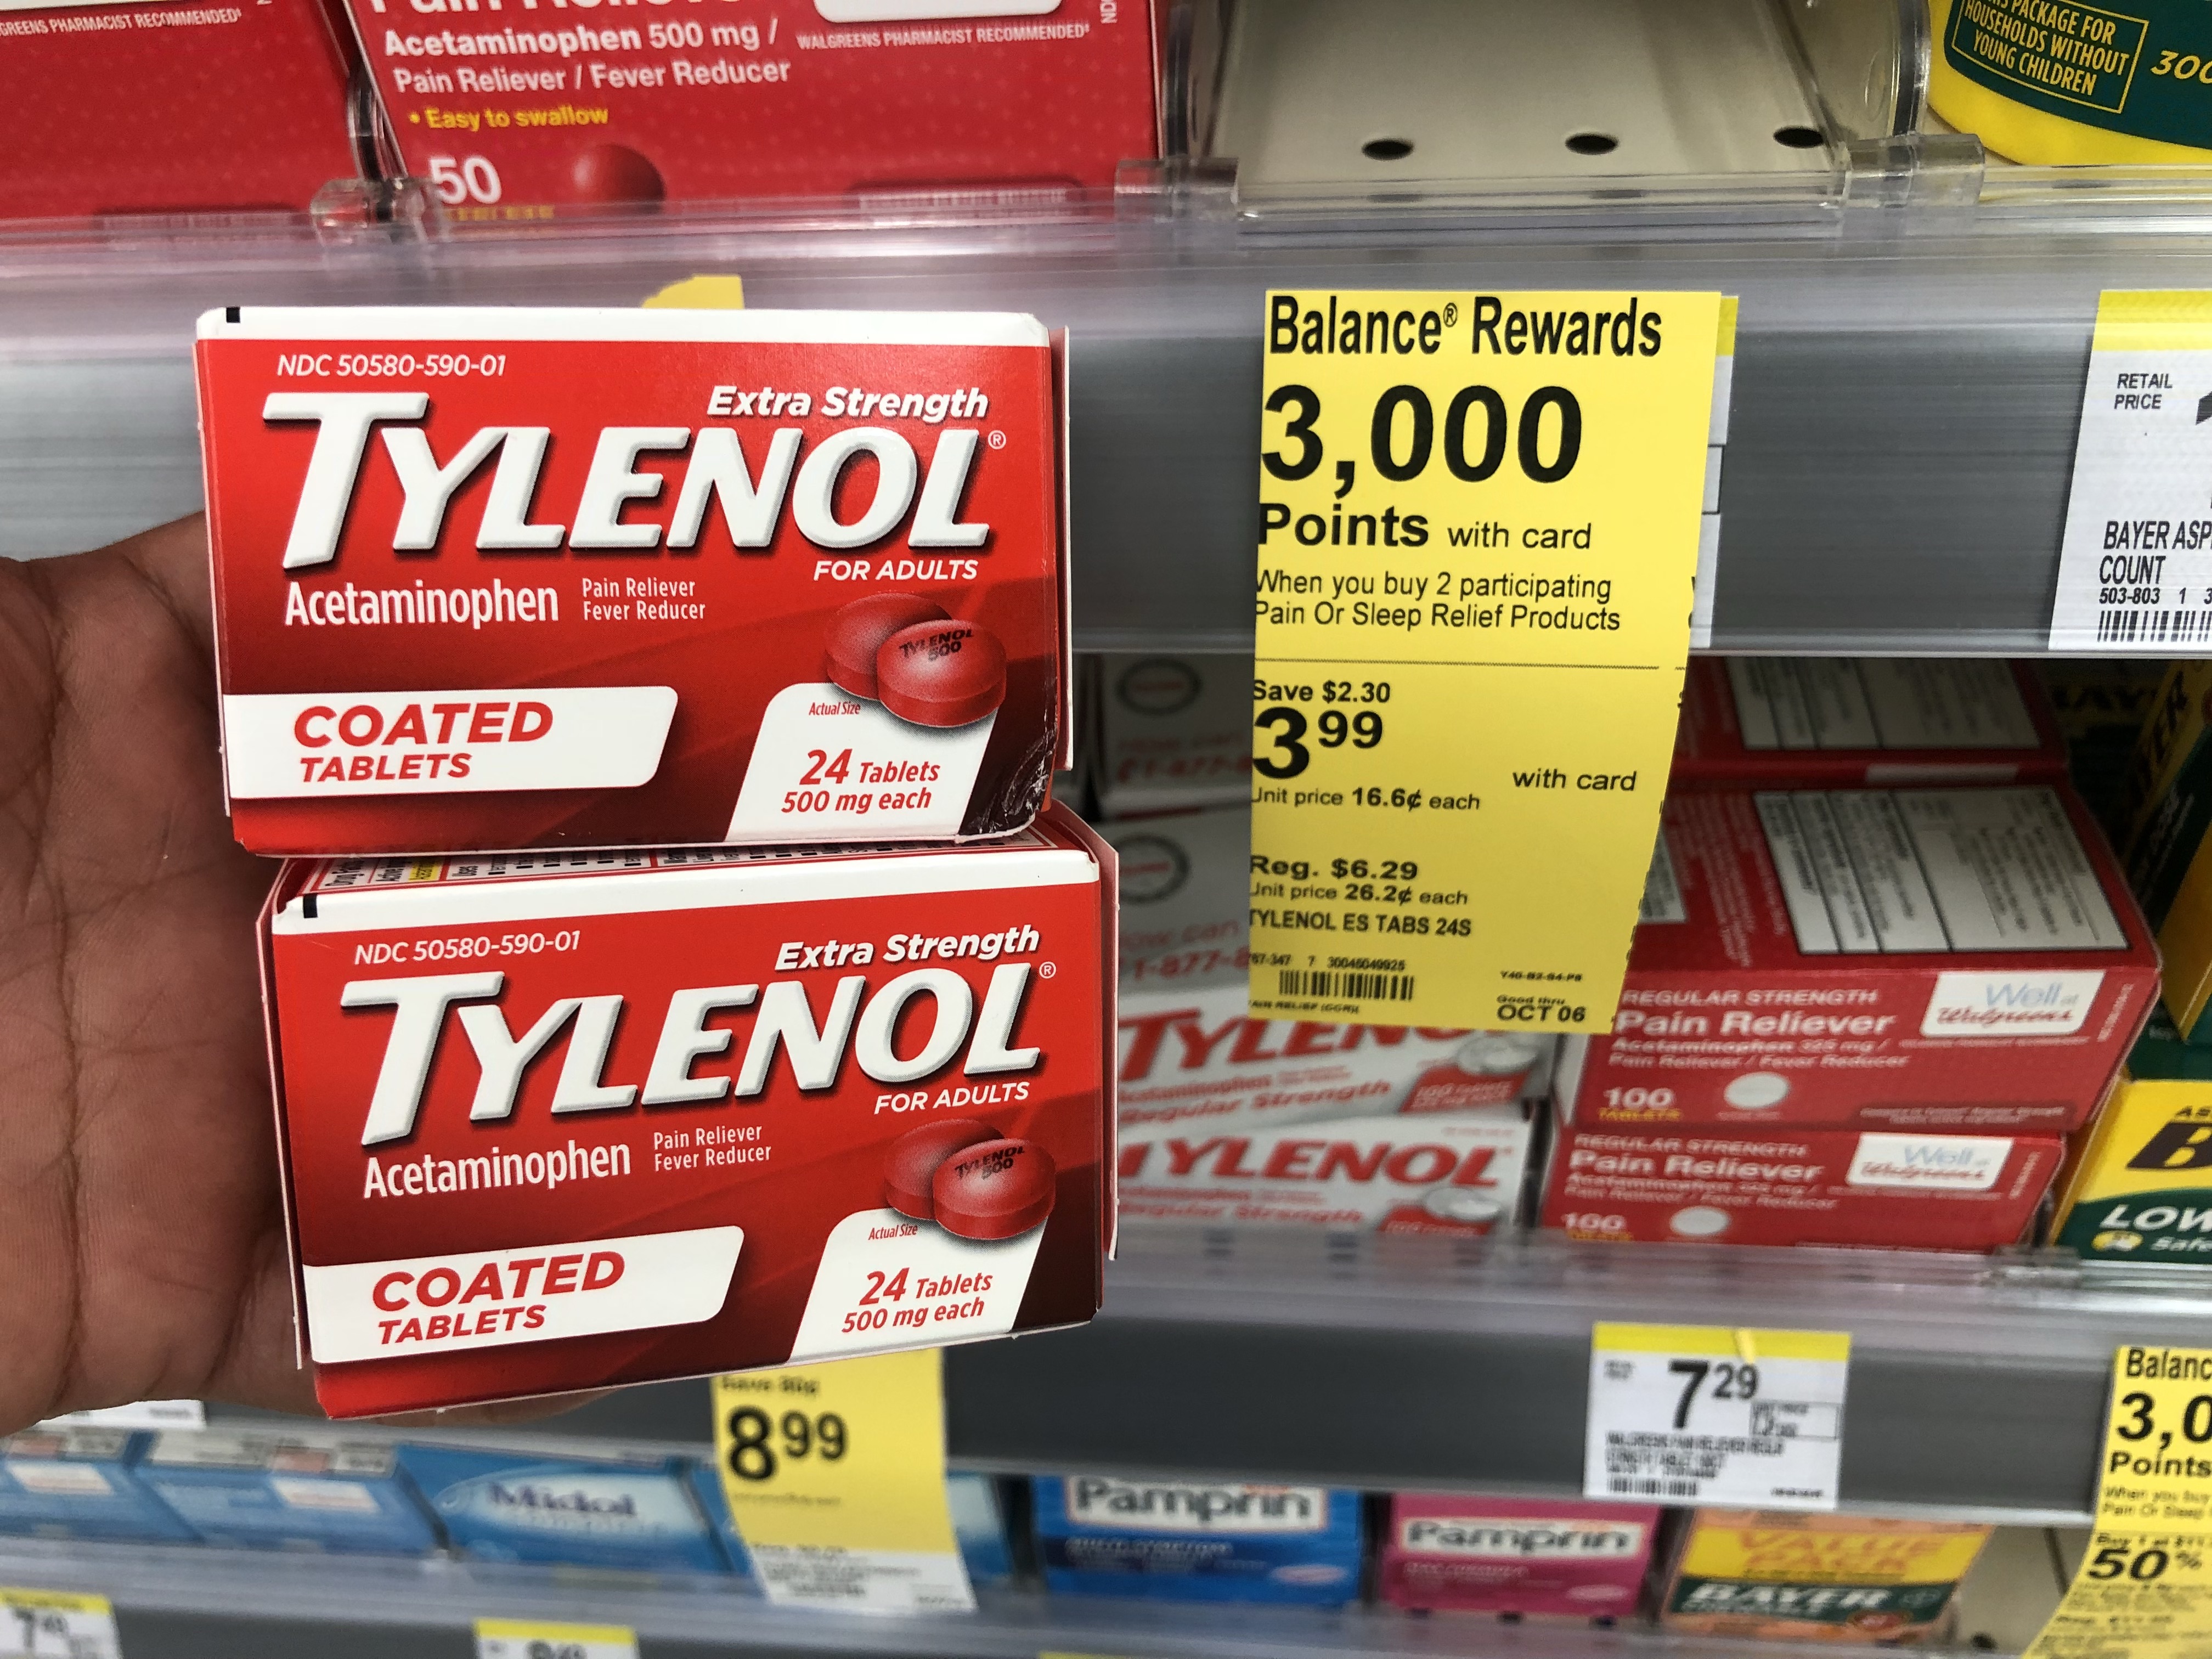 Tylenol Extra Strength 24Count Tablets Only 1.49 Each After Walgreens